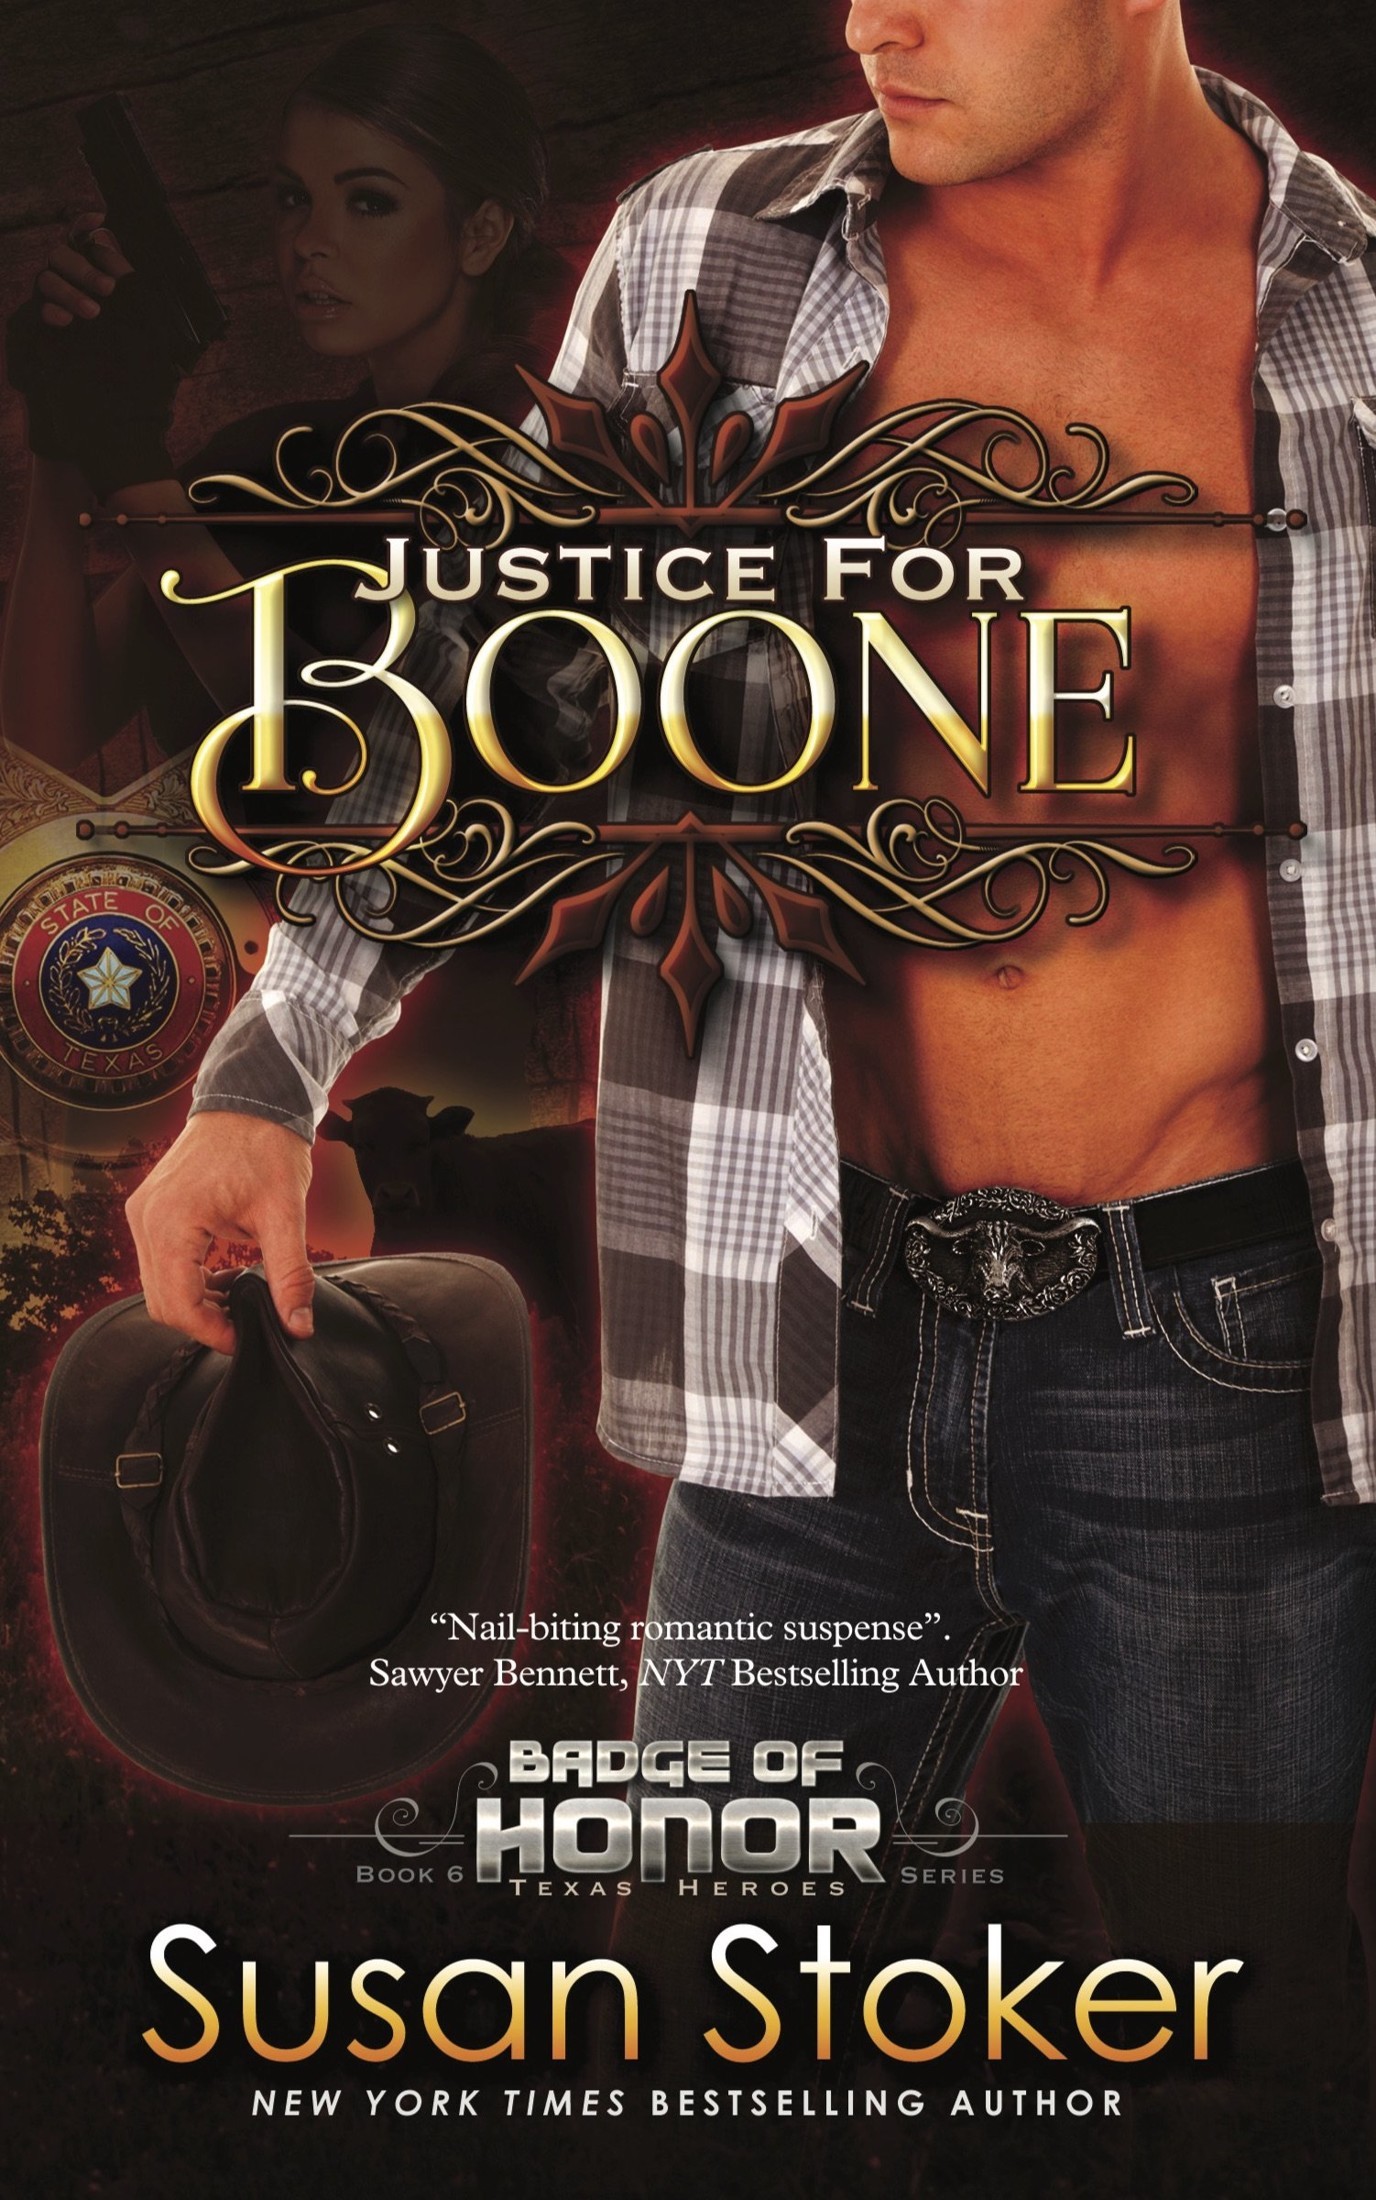 Justice for Boone: Badge of Honor: Texas Heroes, Book 6 by Susan Stoker